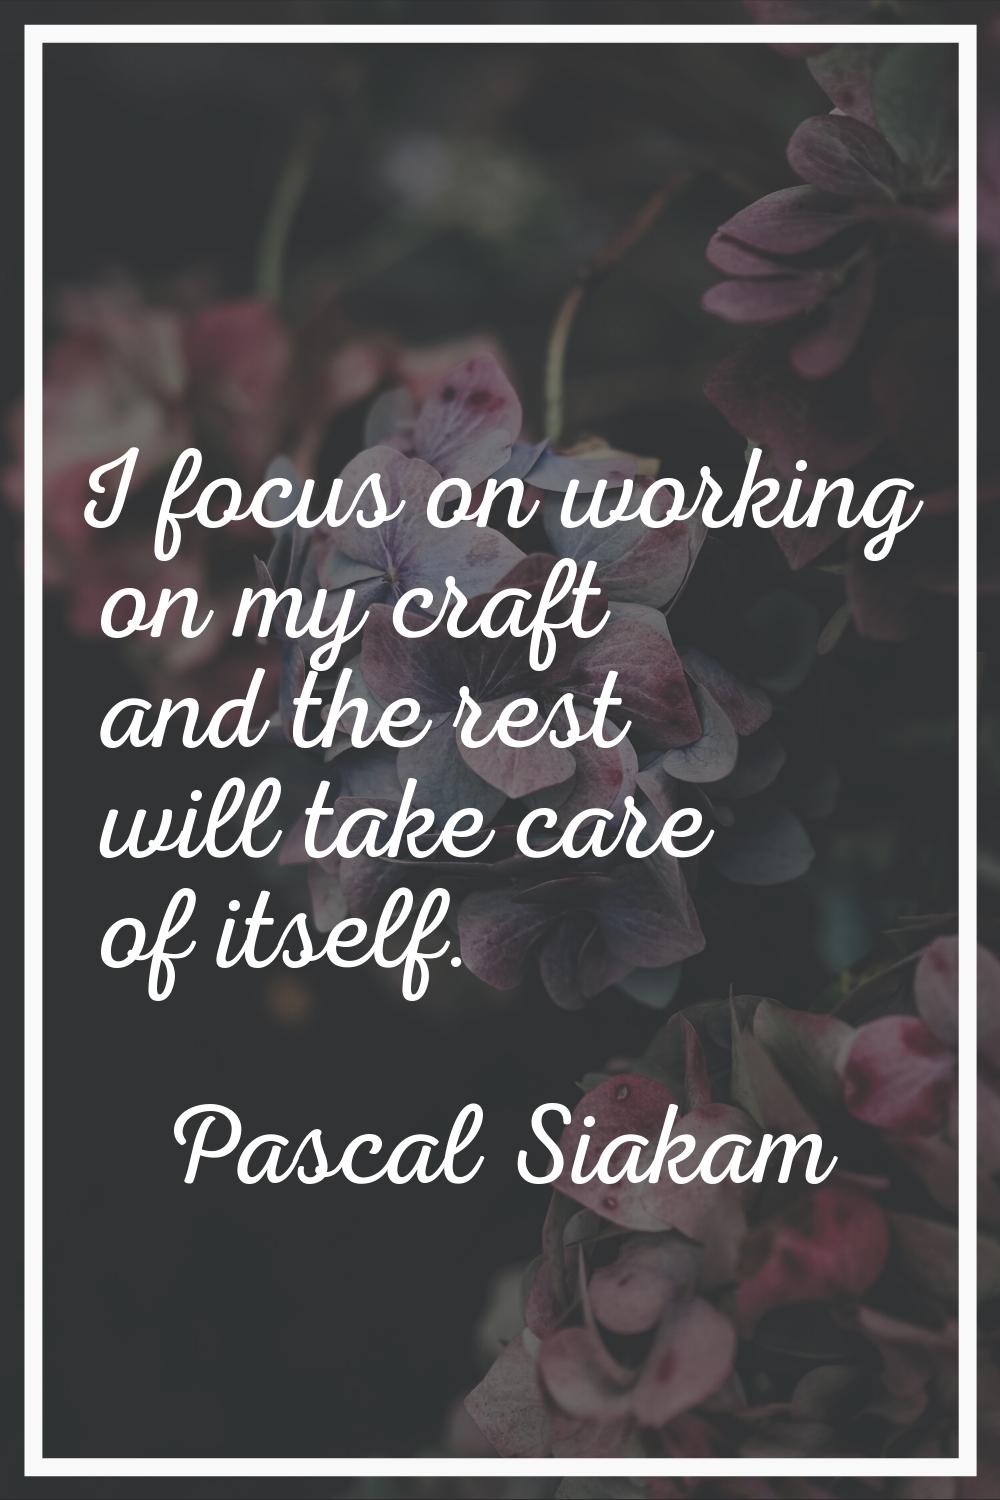 I focus on working on my craft and the rest will take care of itself.